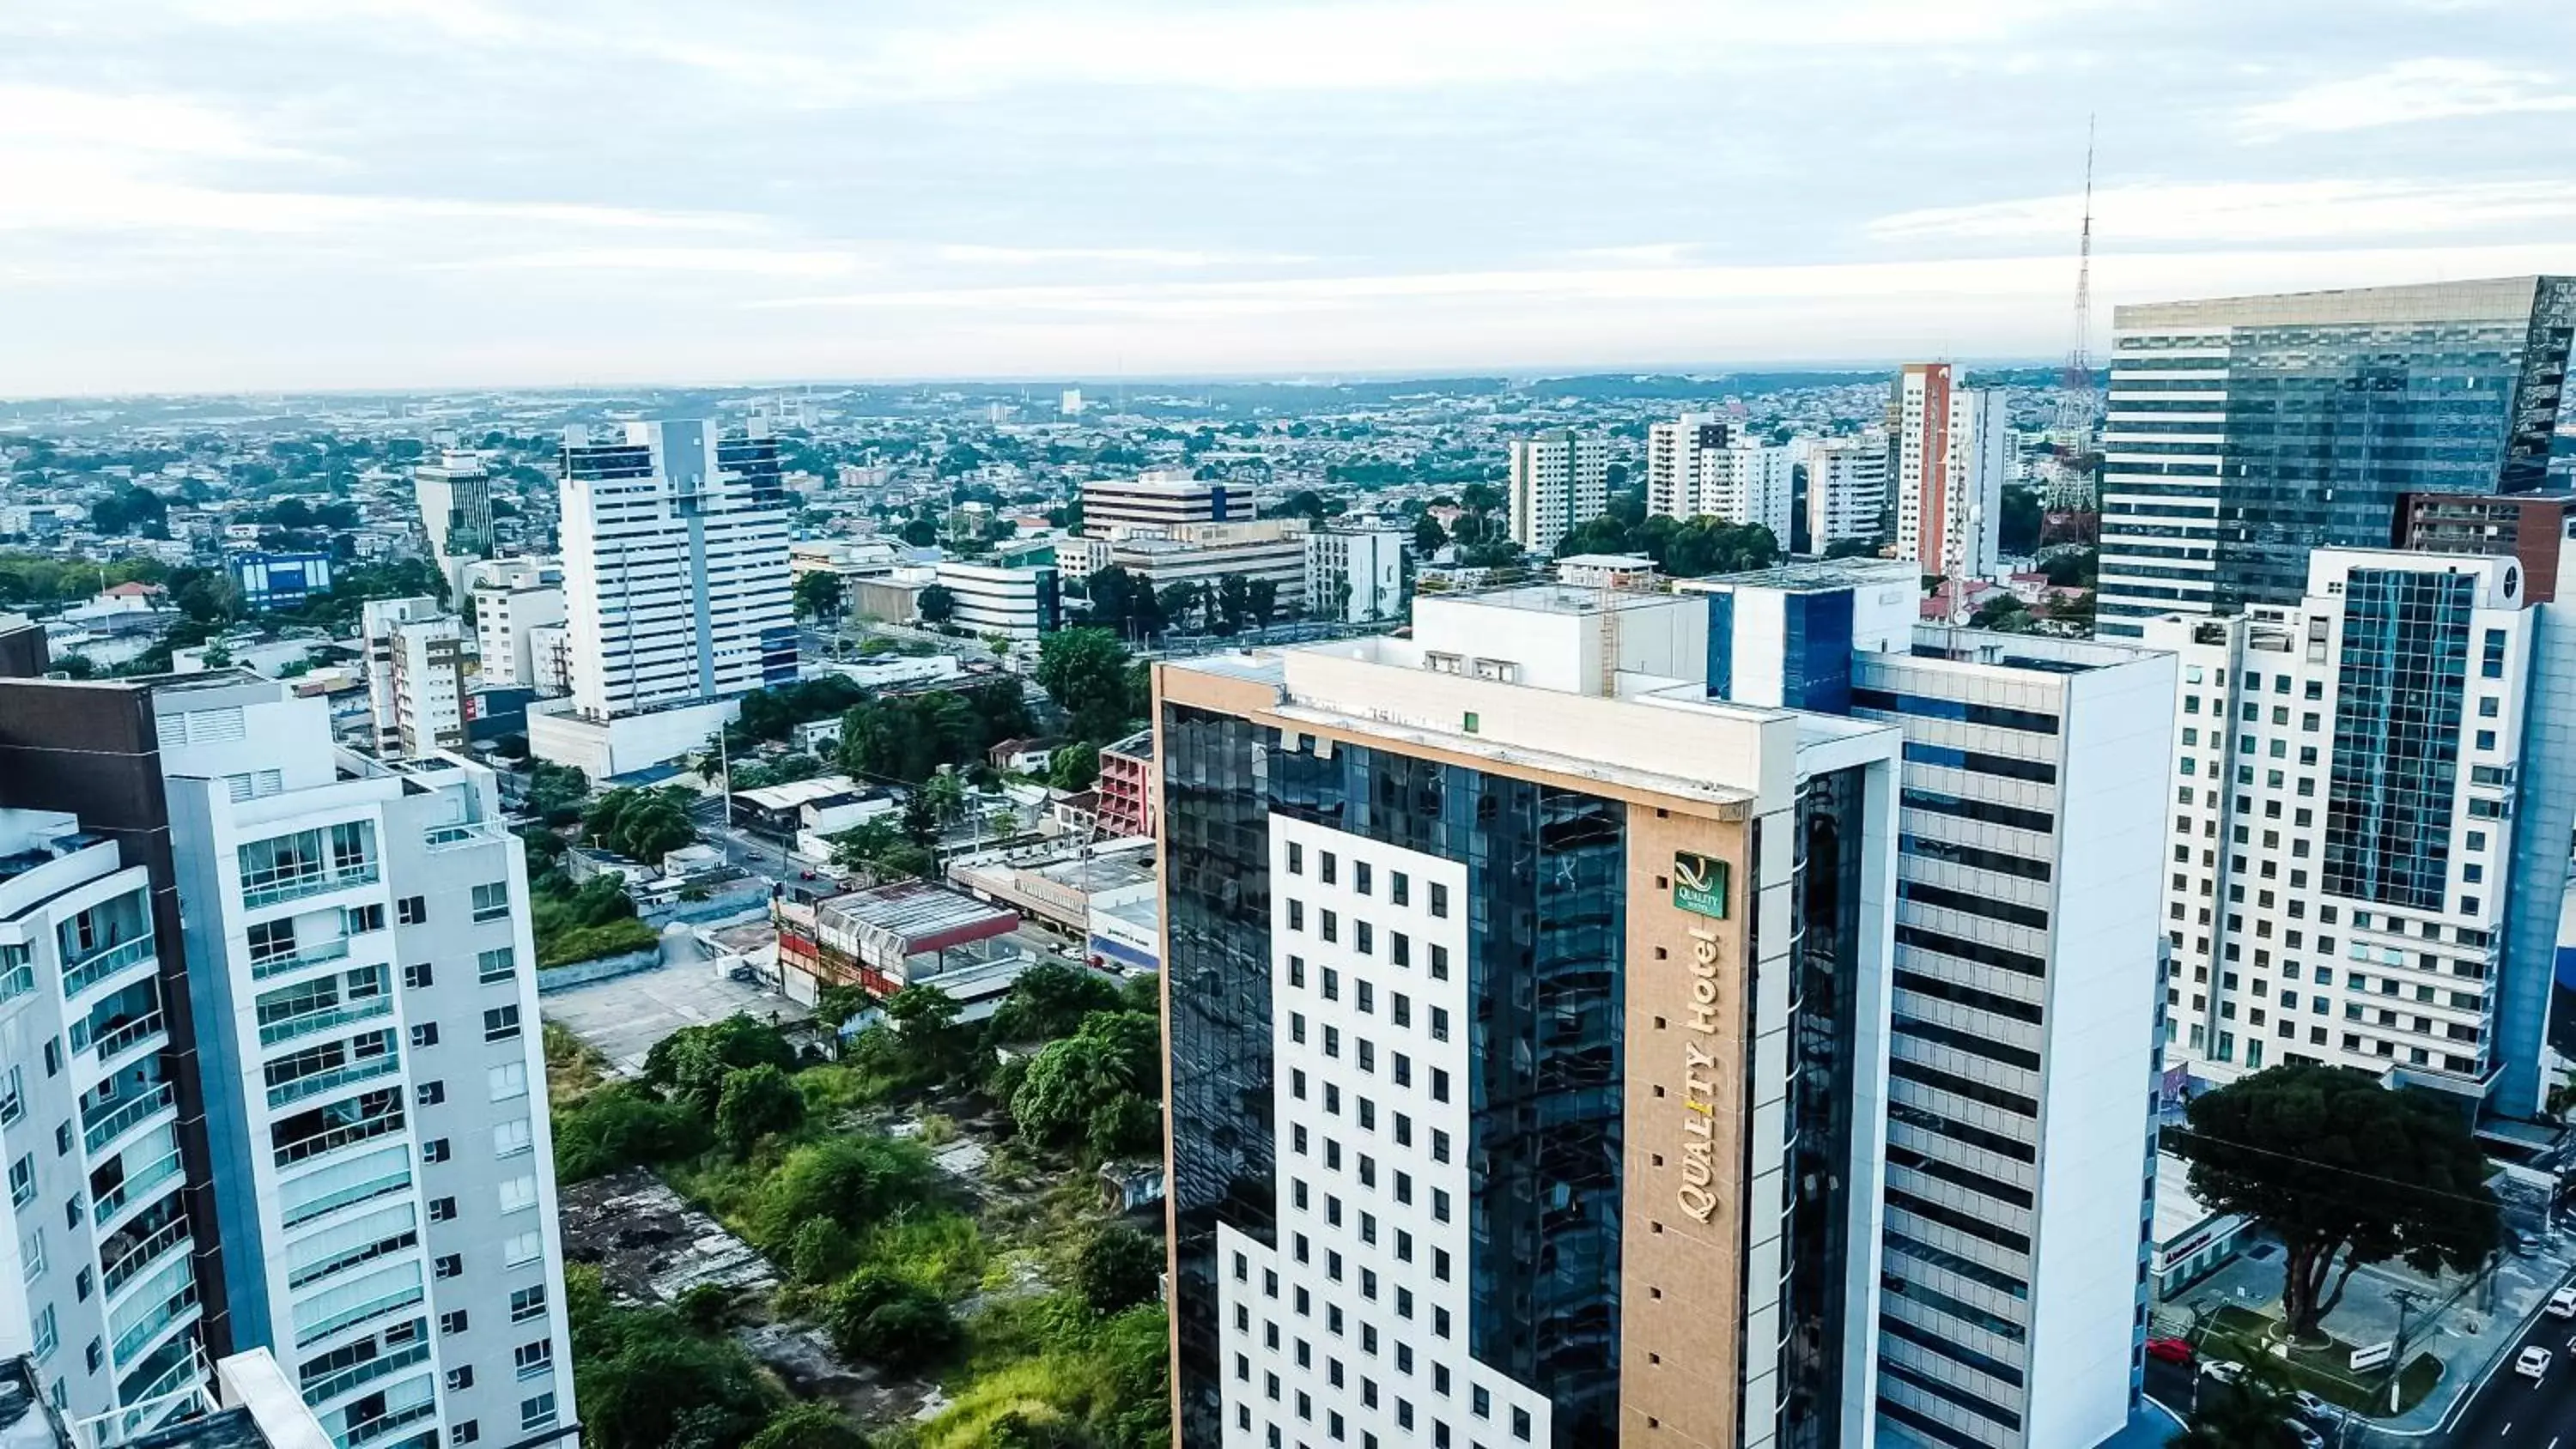 Off site, Bird's-eye View in Quality Hotel Manaus